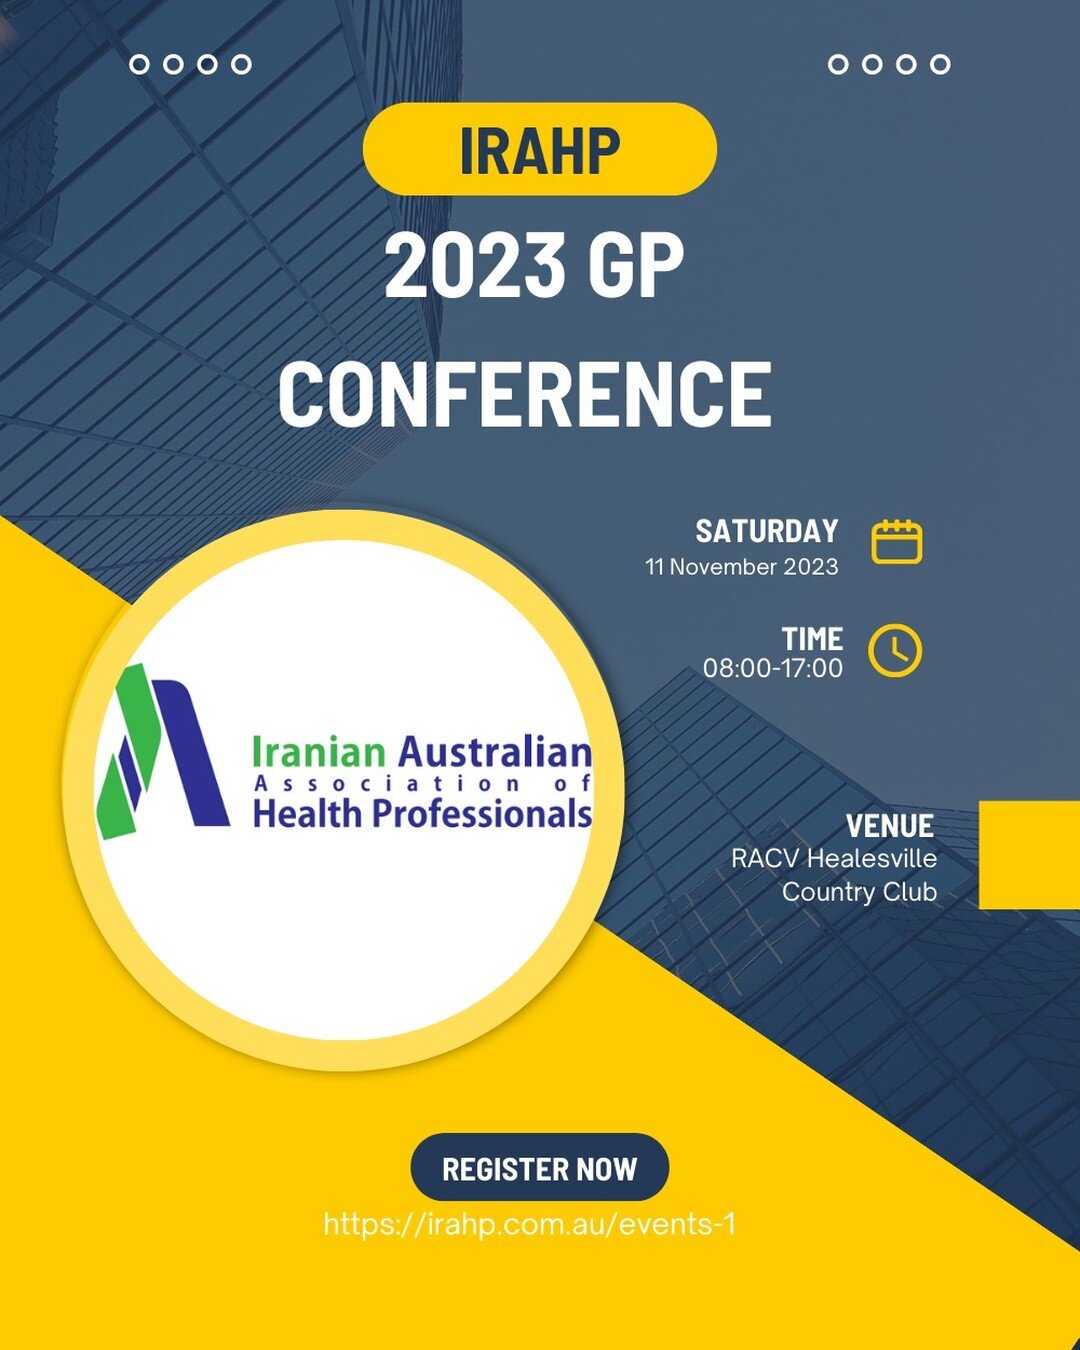 Great news!

Registration for the inaugural IRAHP GP conference is now open!
Don't miss the early bird registration ending on 12 September. 
For event information and registration, visit 
https://www.irahp.com.au/events-1

We would love to see all of